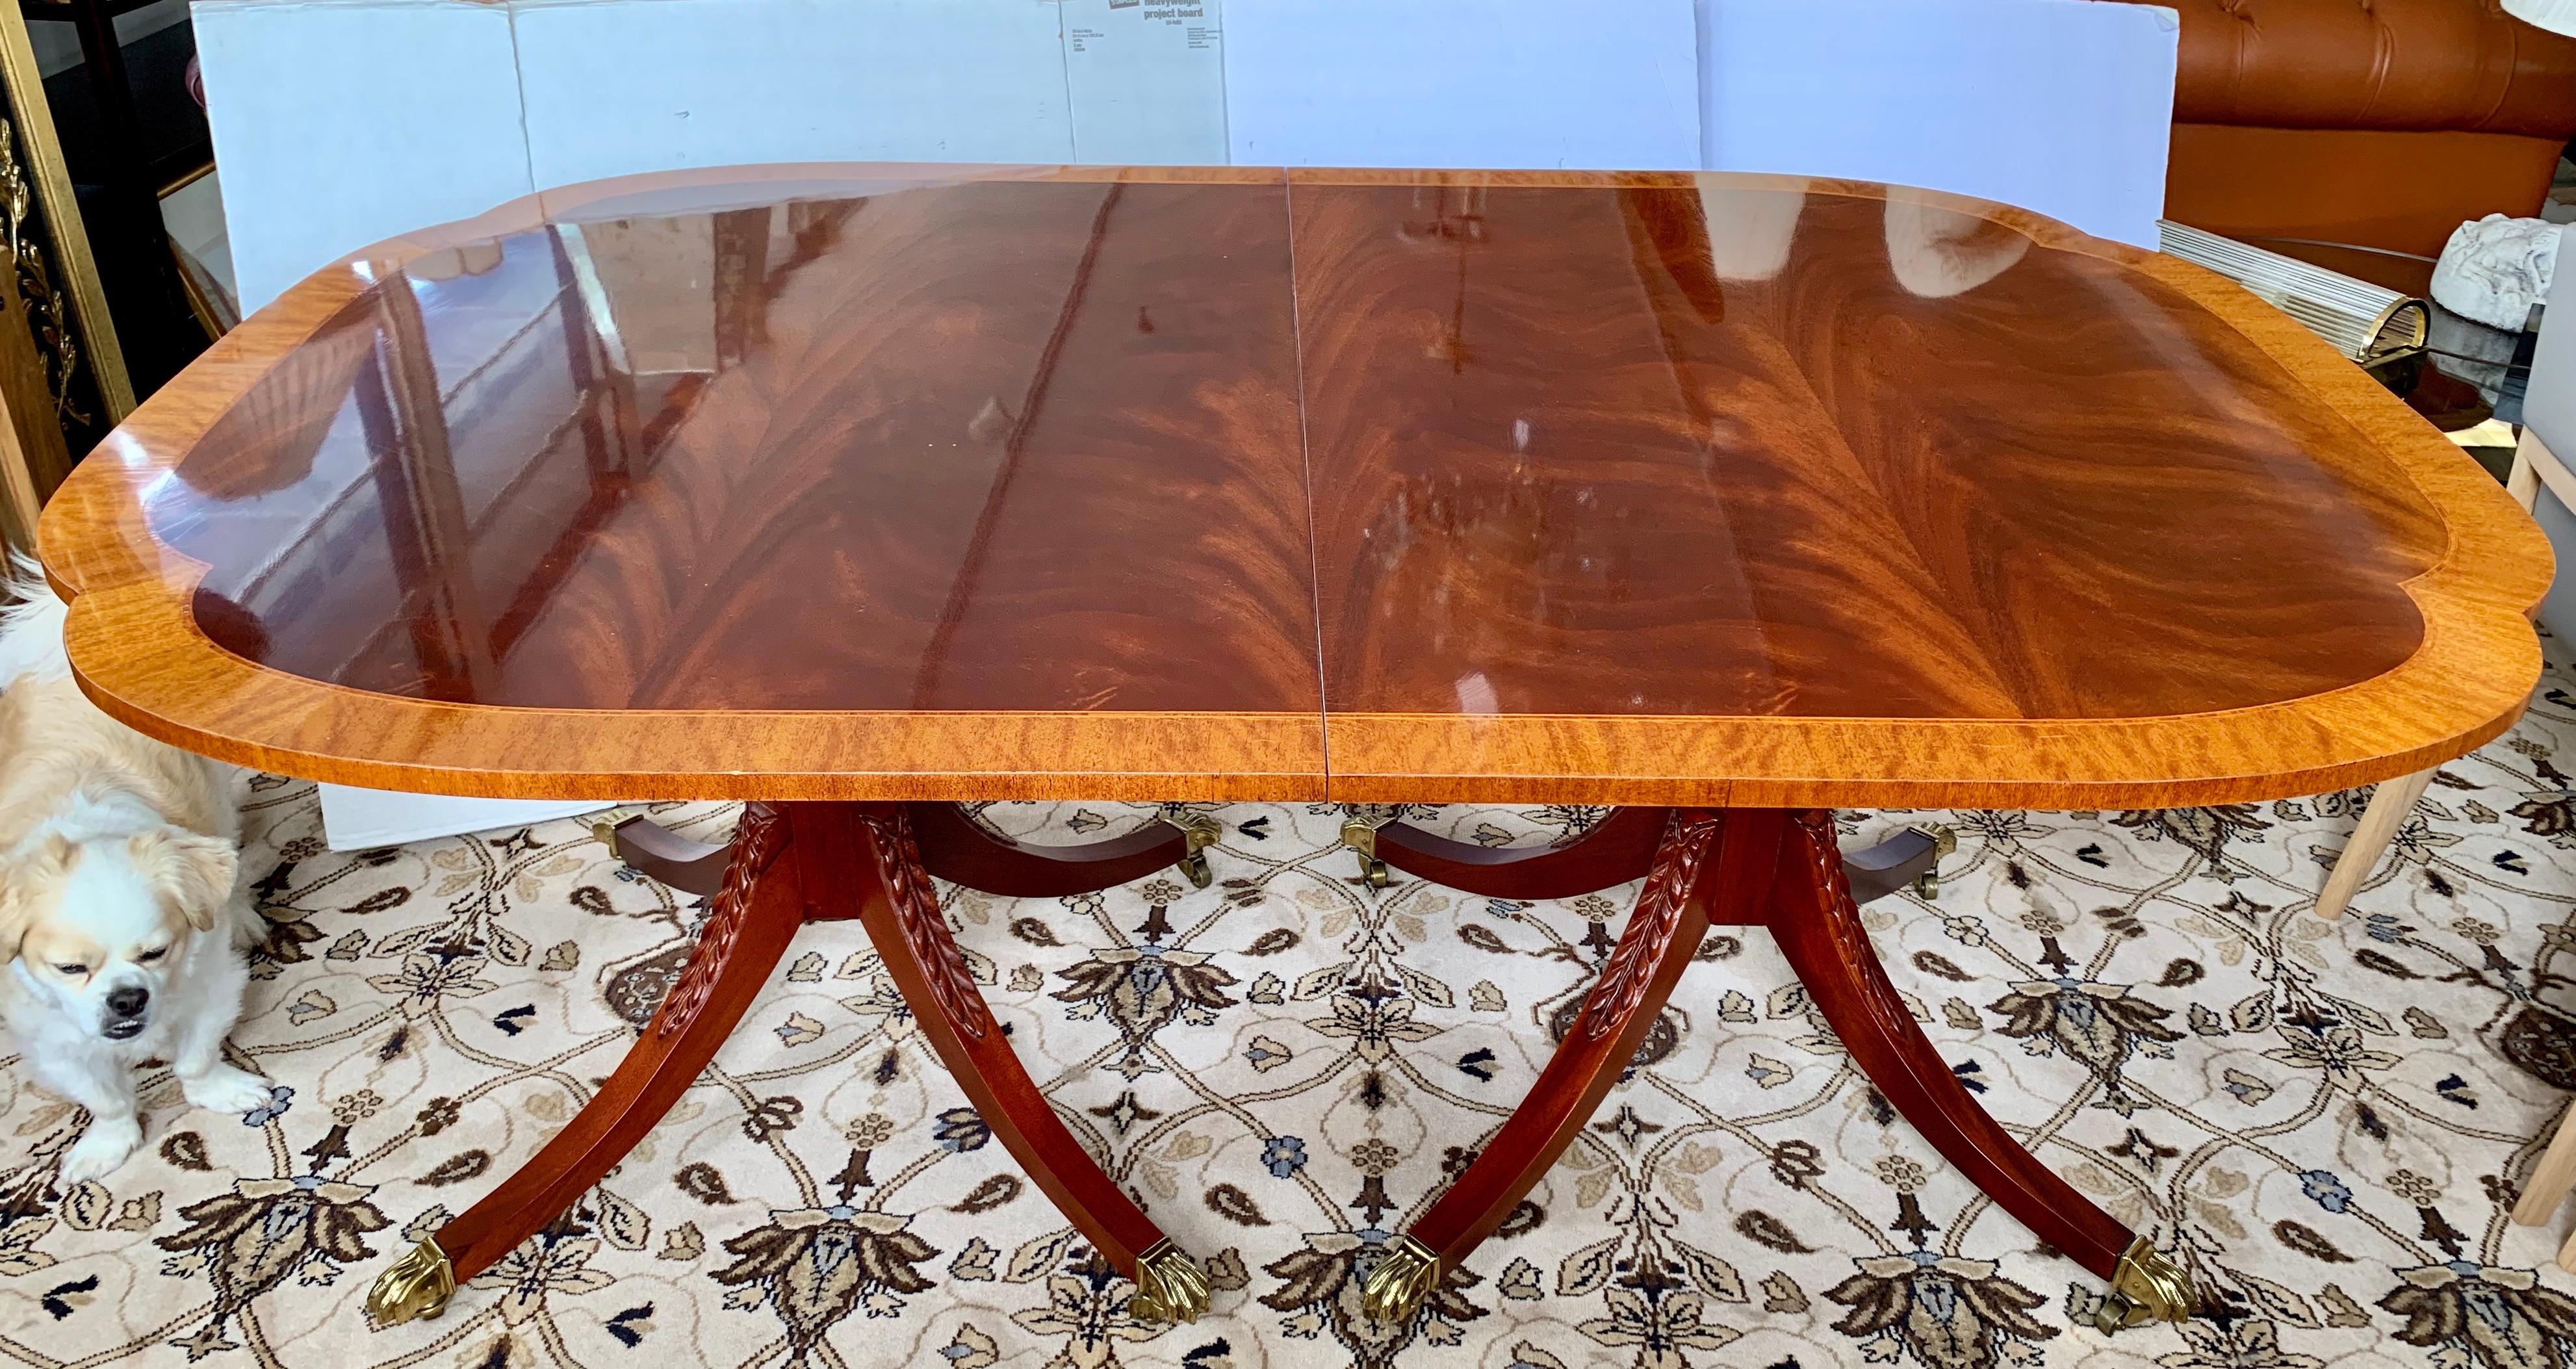 Fabulous quality book-matched flame mahogany double pedestal, three leaves, scalloped edge dining table. Features satinwood banding (inlay) and splay-legged pedestals with carved acanthus leaf detail on cast brass lion's paw feet with castors.